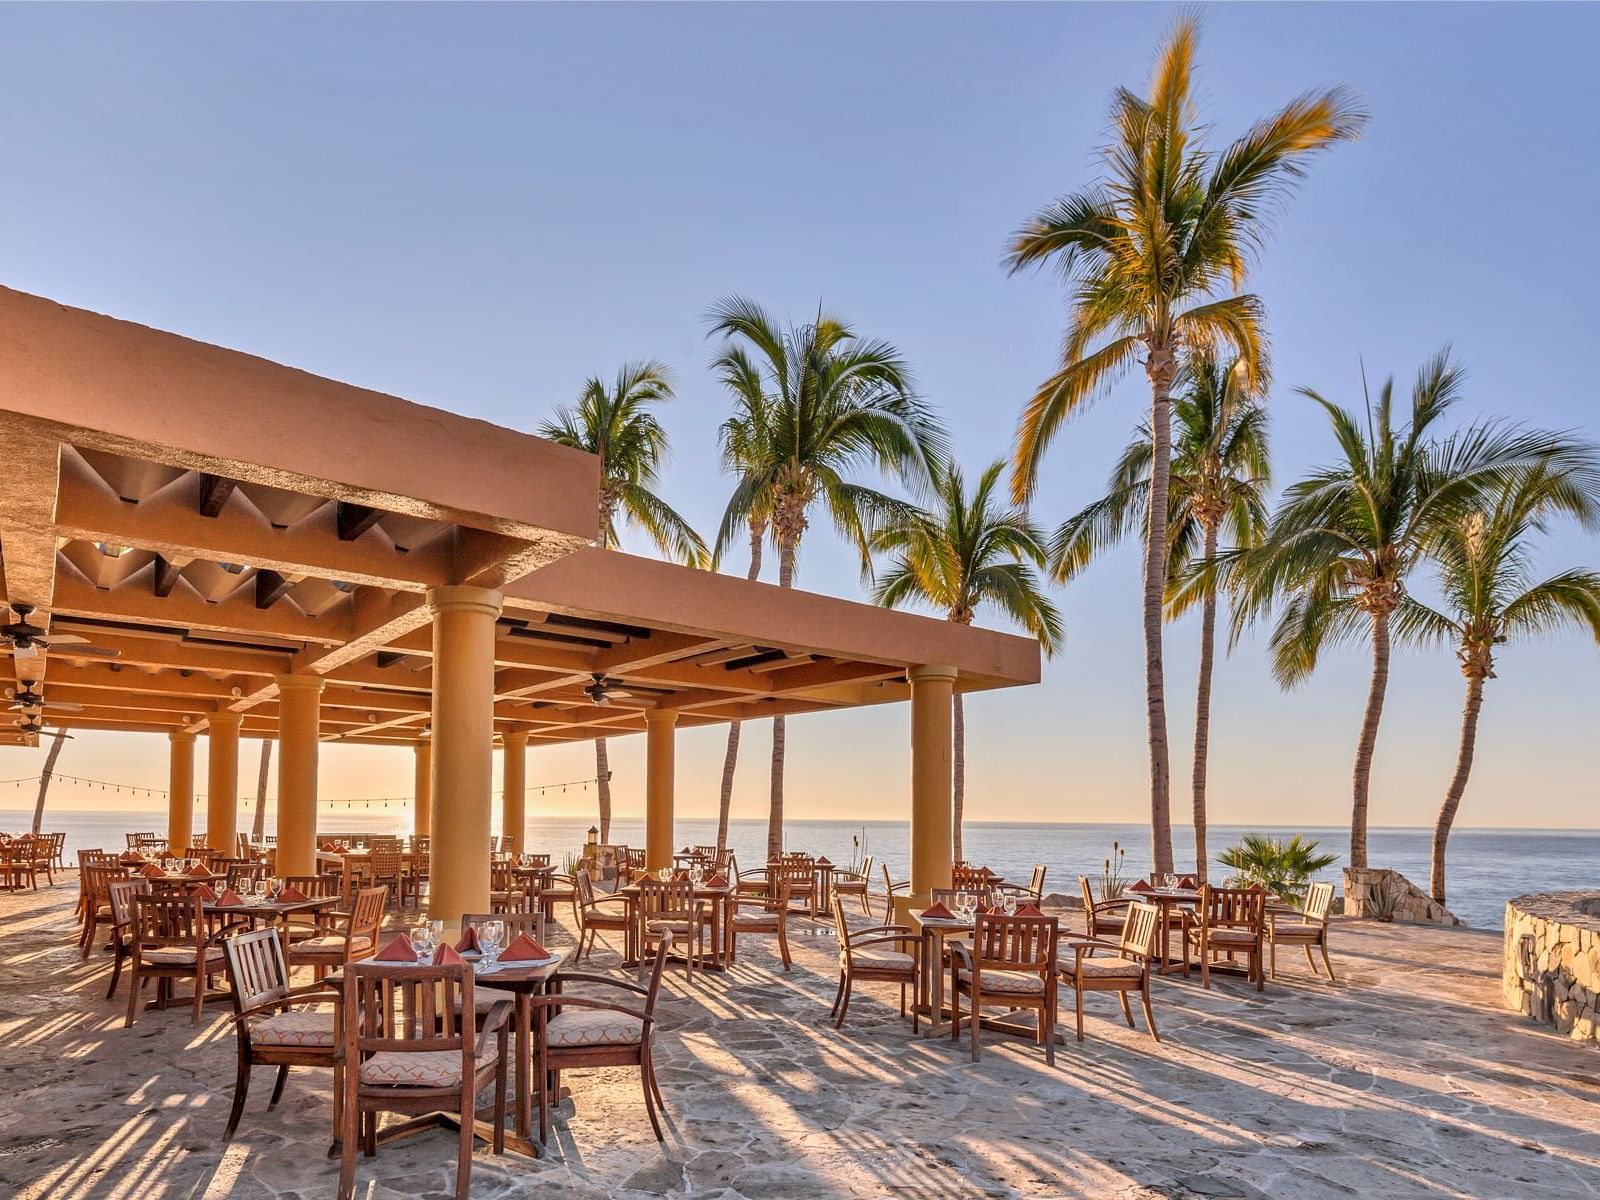 Outdoor dining tables by the beach at La Colección Resorts